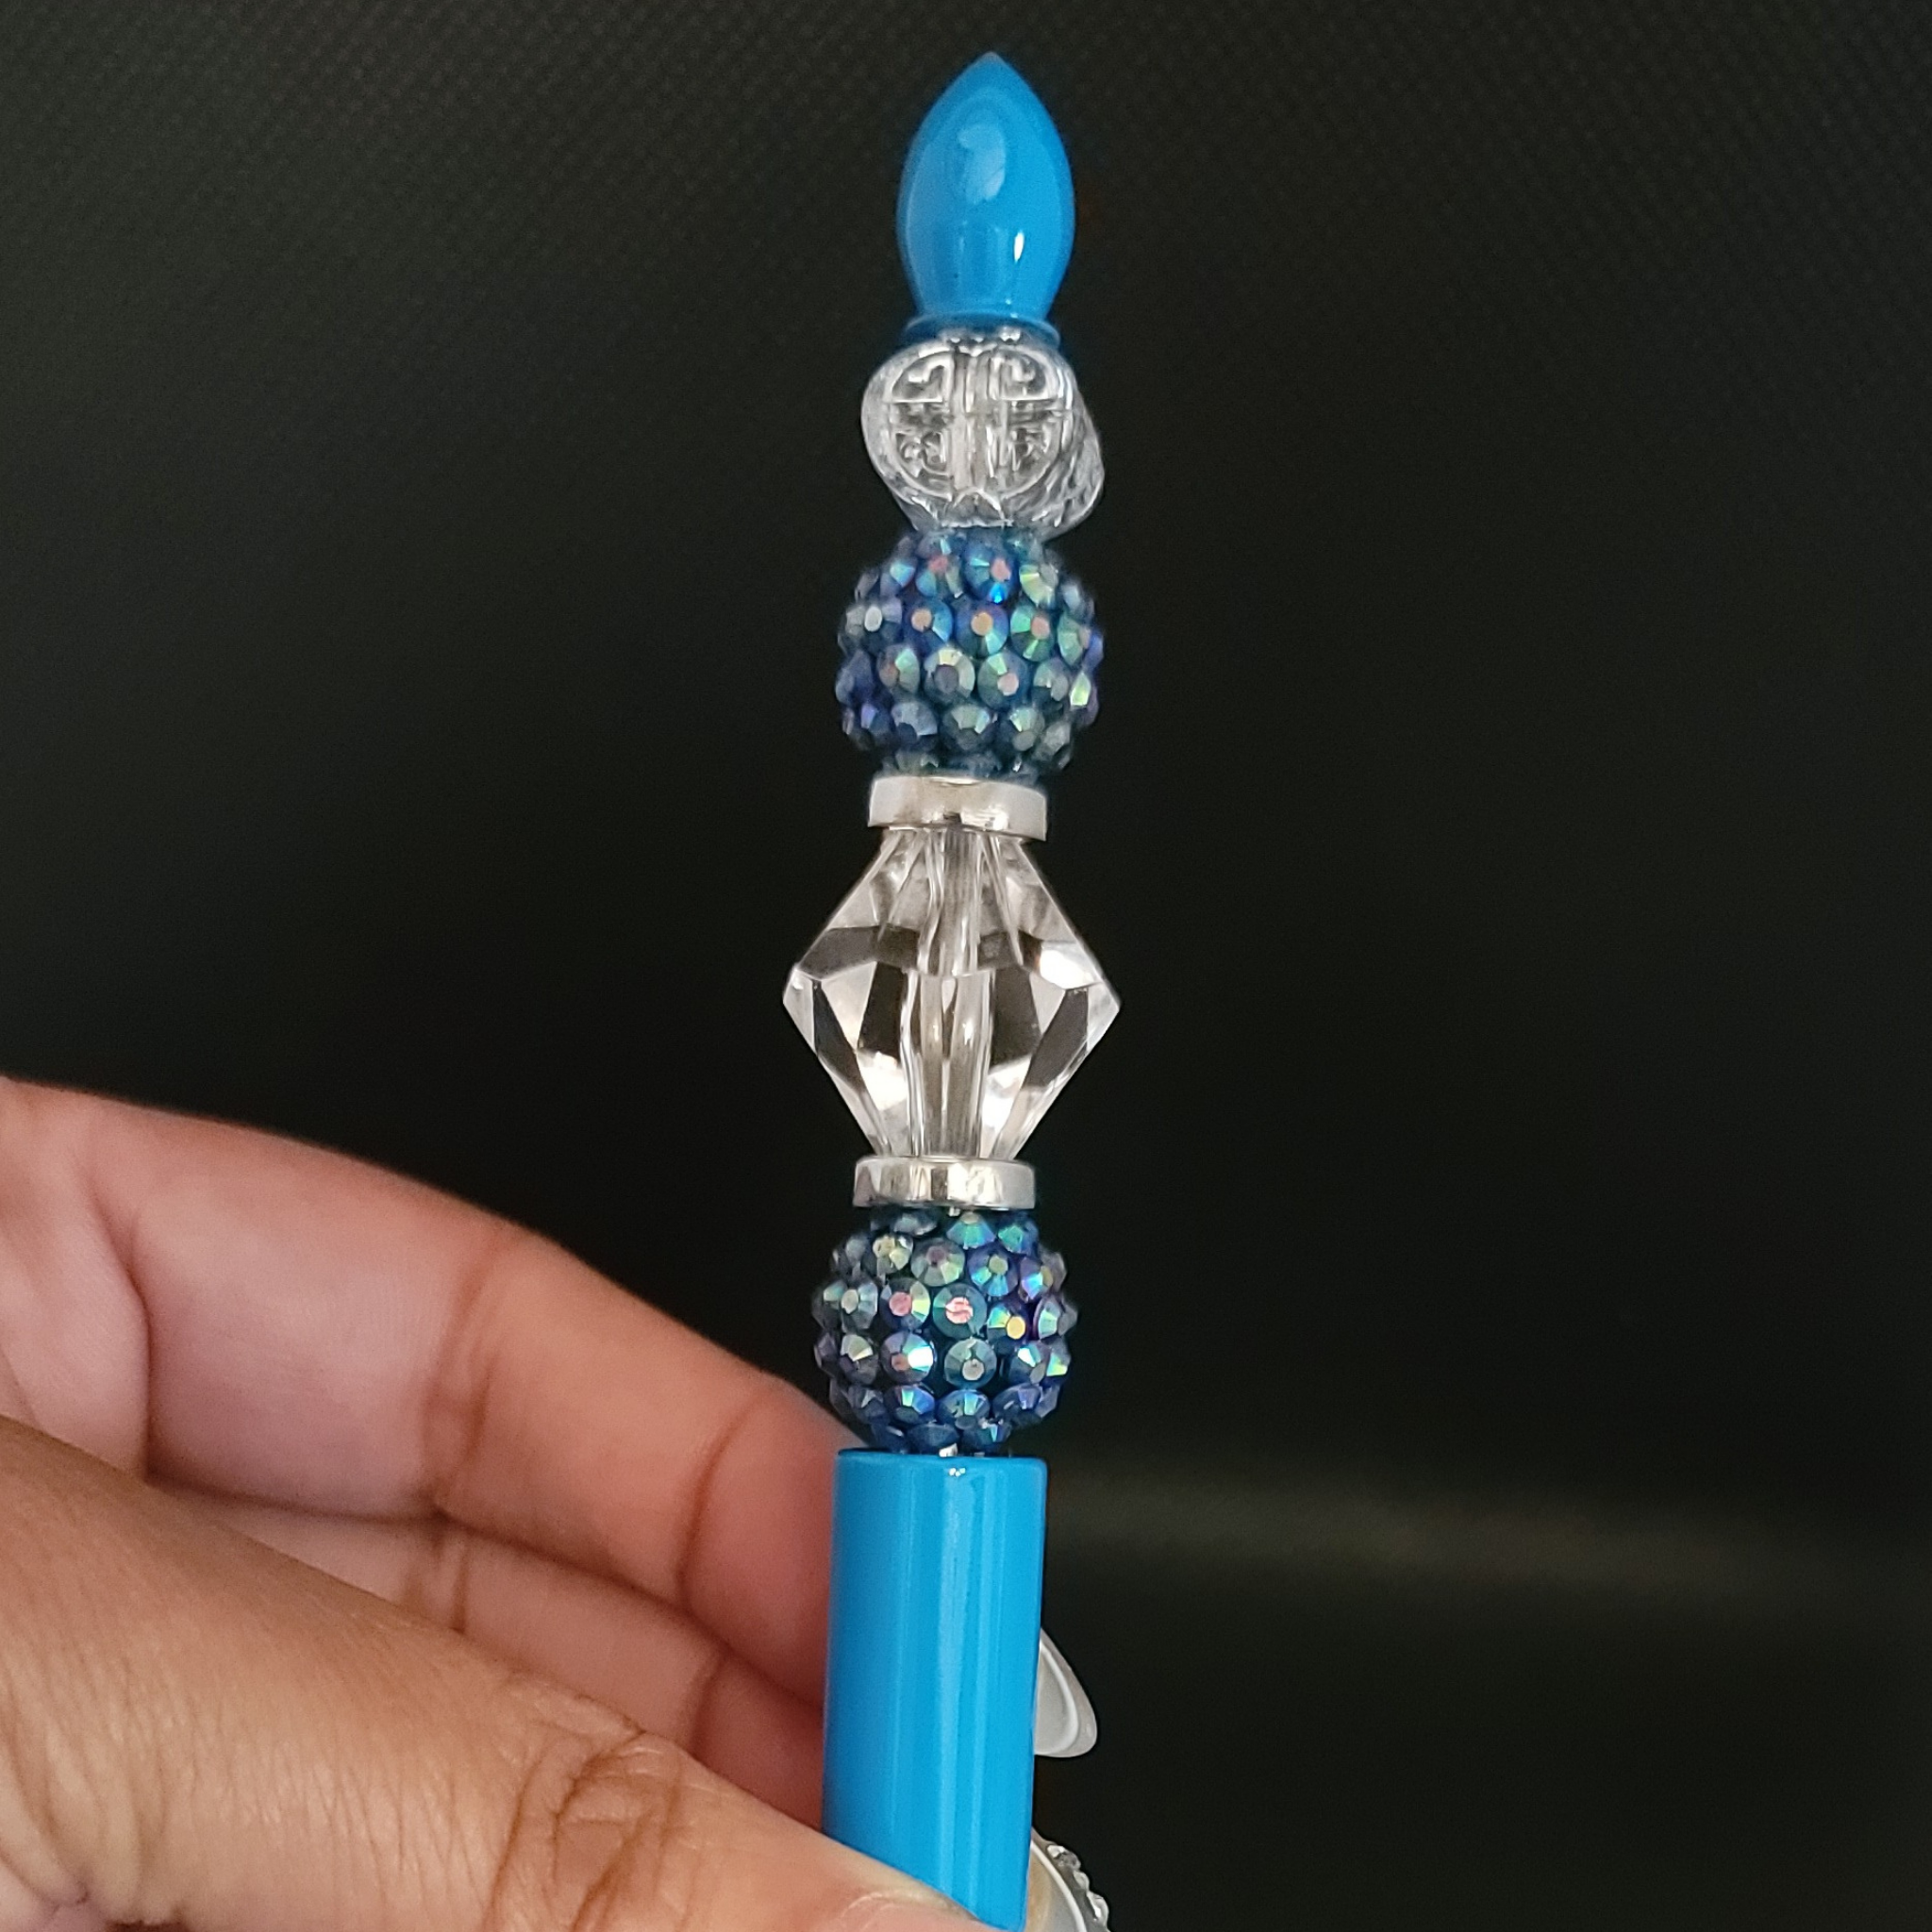 Aria - Crystal, Silver & Teal Blue Jeweled Ink Pen